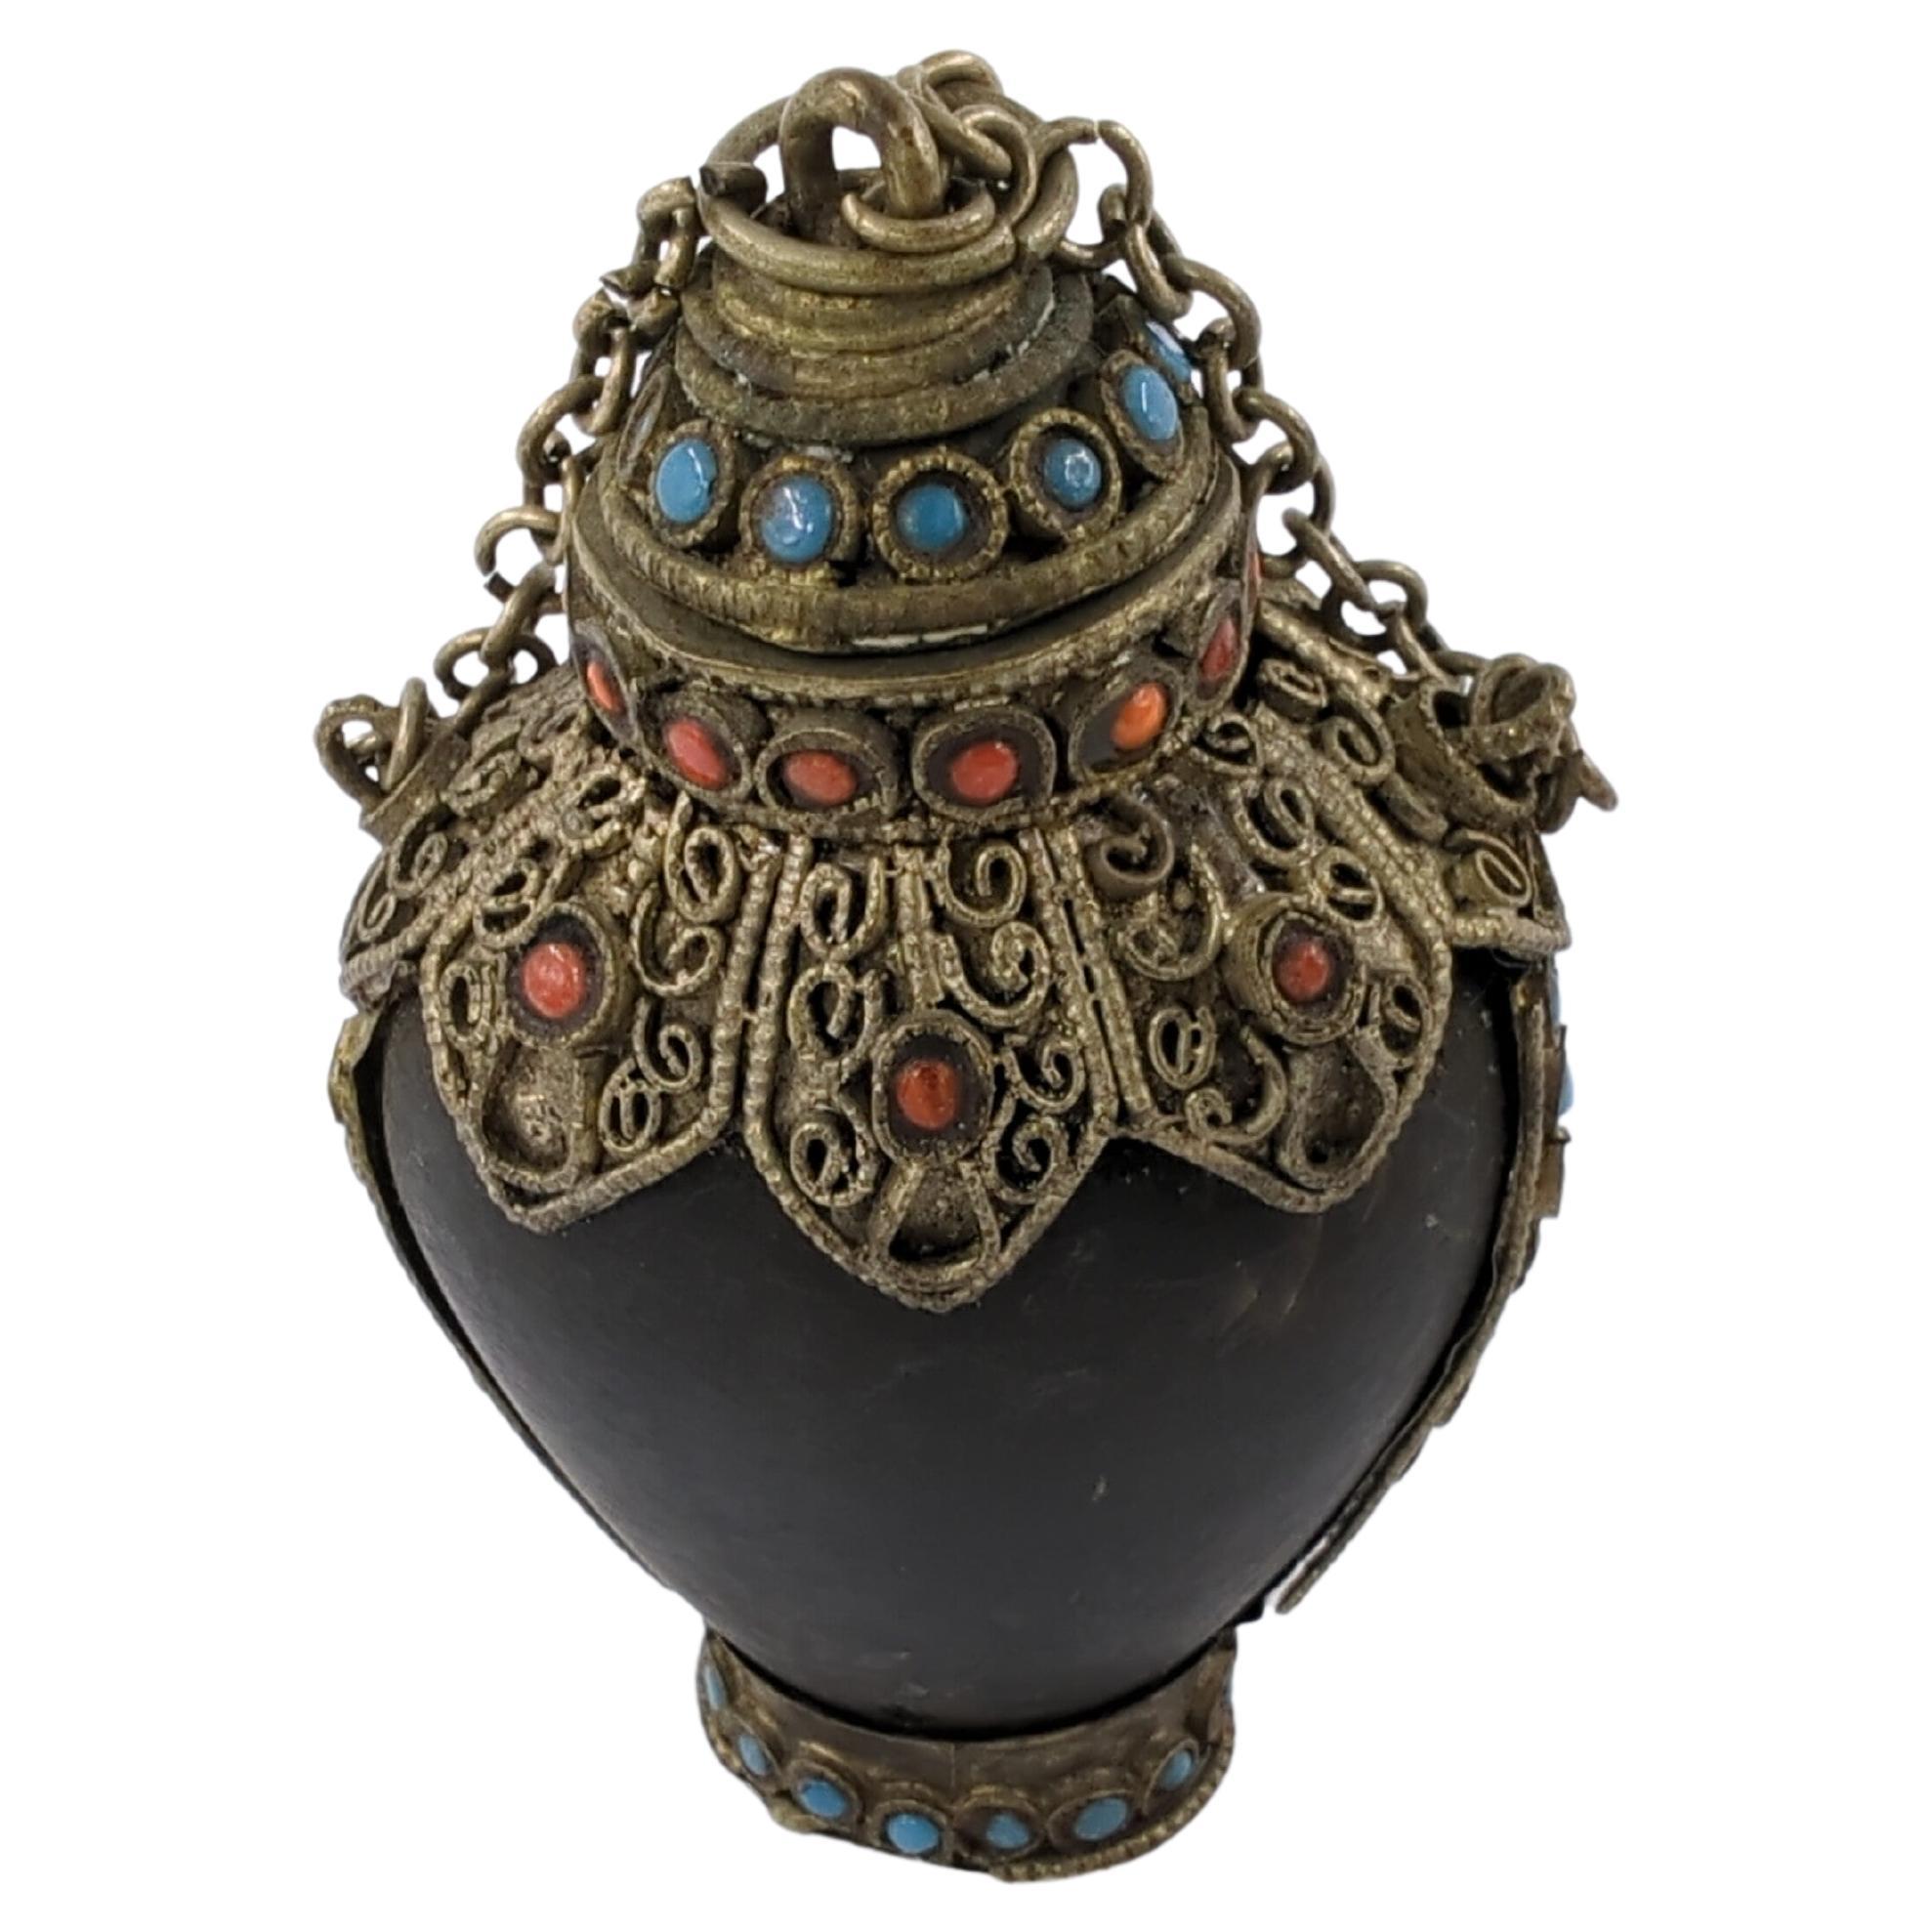 A vintage Mongolian snuff bottle, with silver filigree work and inlaid blue and red paste gems, having a chained matching stopper with silver spoon.

weight: 64 Grams
circa: 20th Century